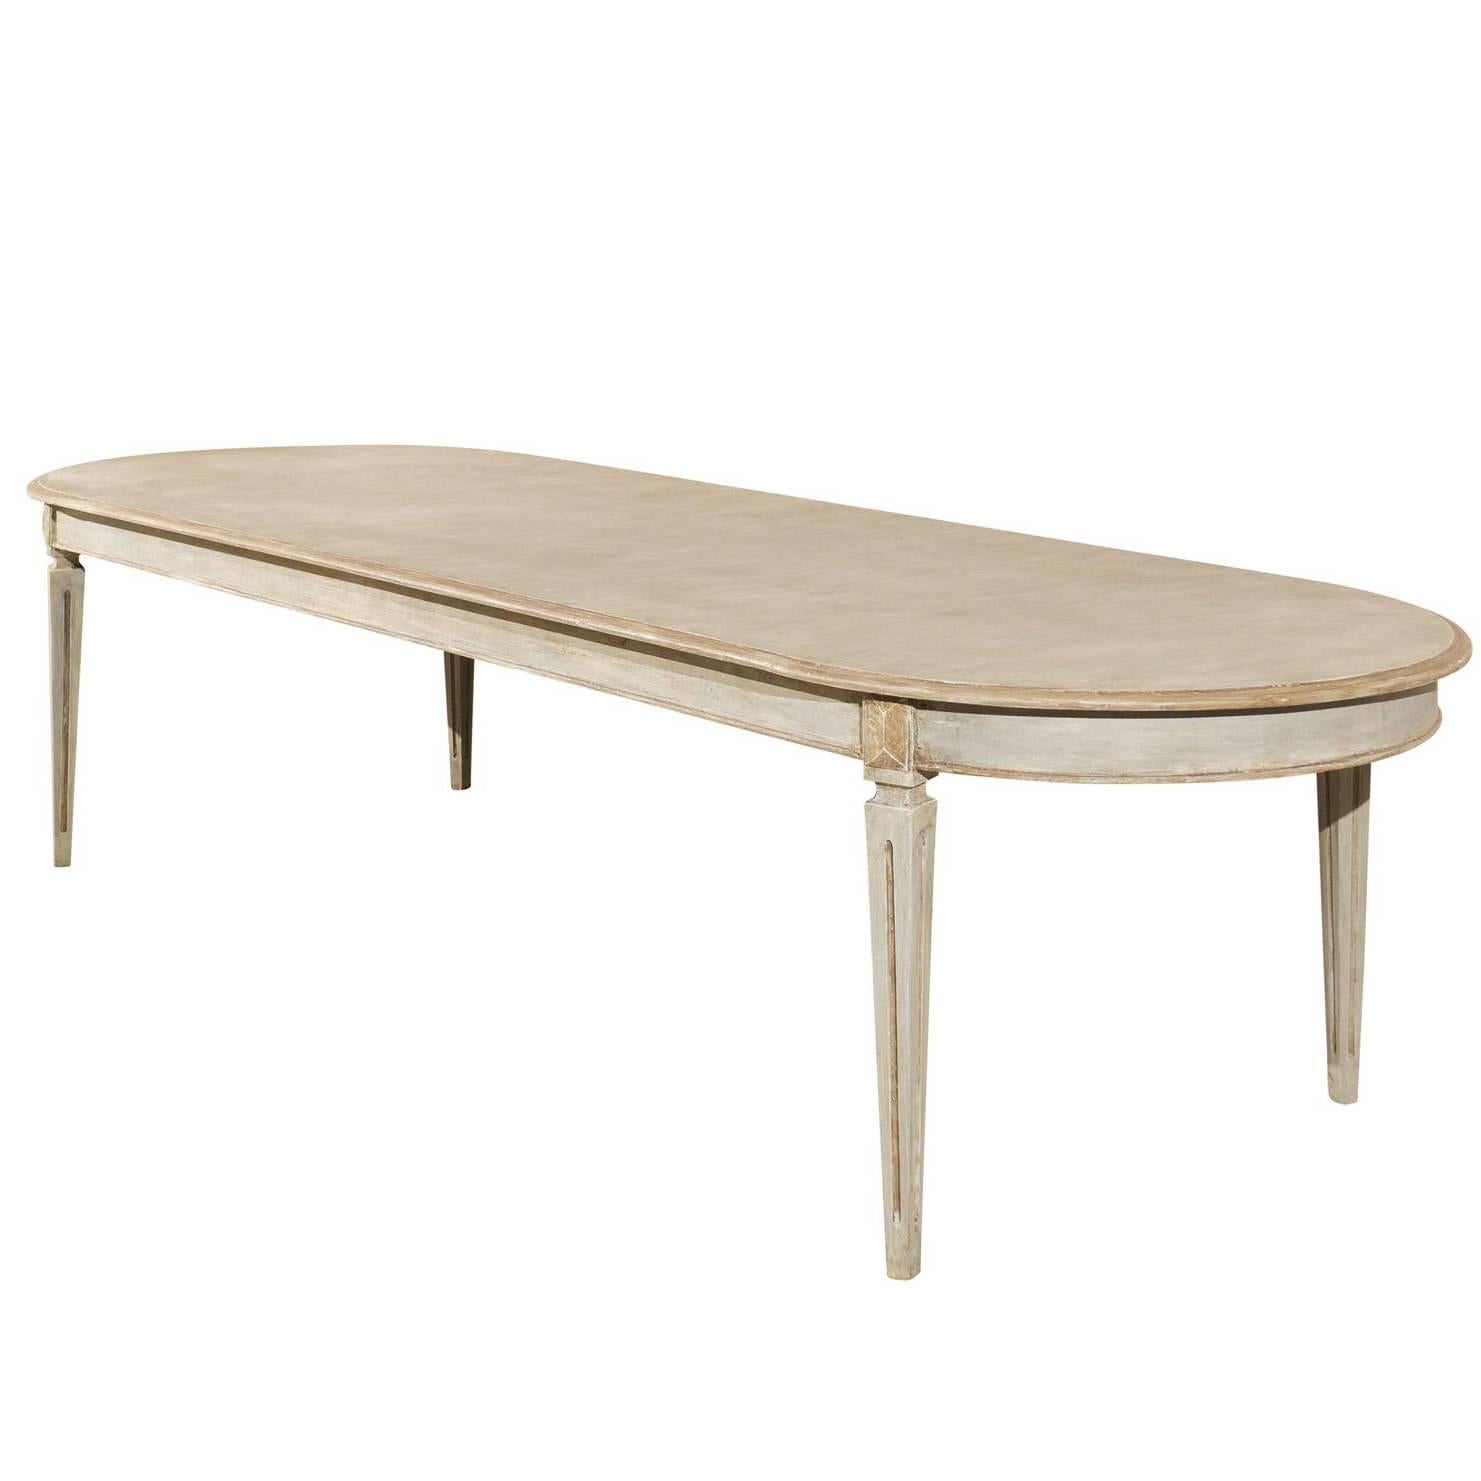 Swedish Oval Shaped Gustavian Style Dining Table